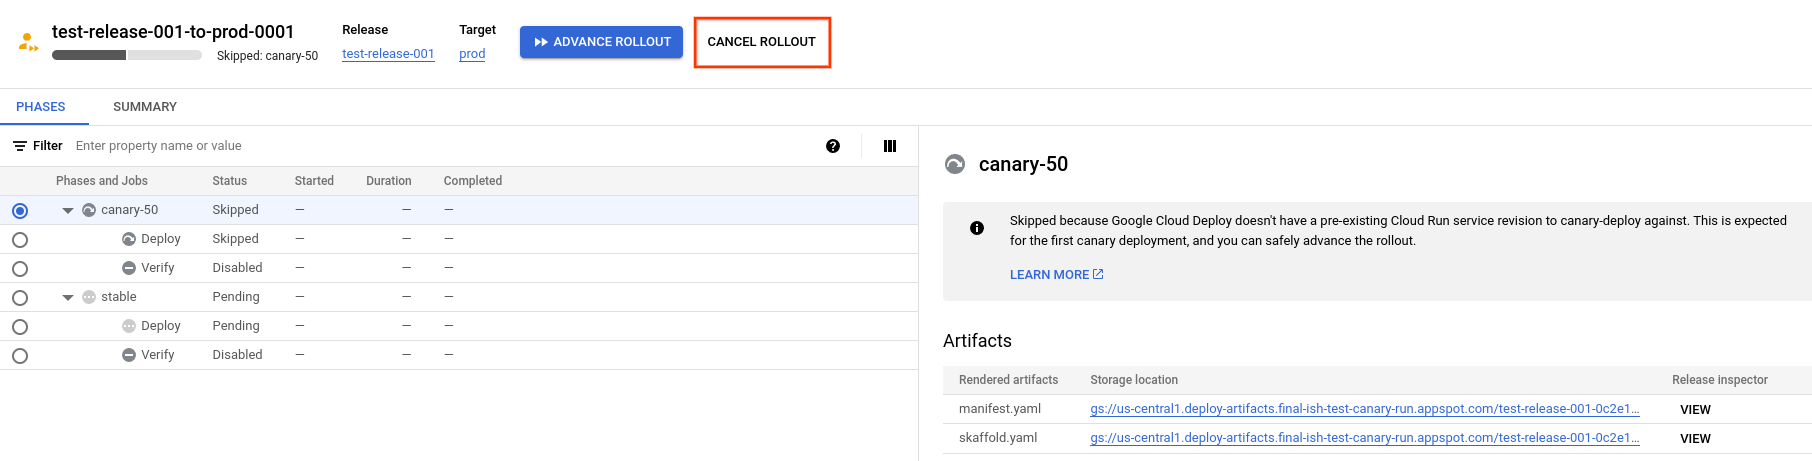 rollout details in Google Cloud console 